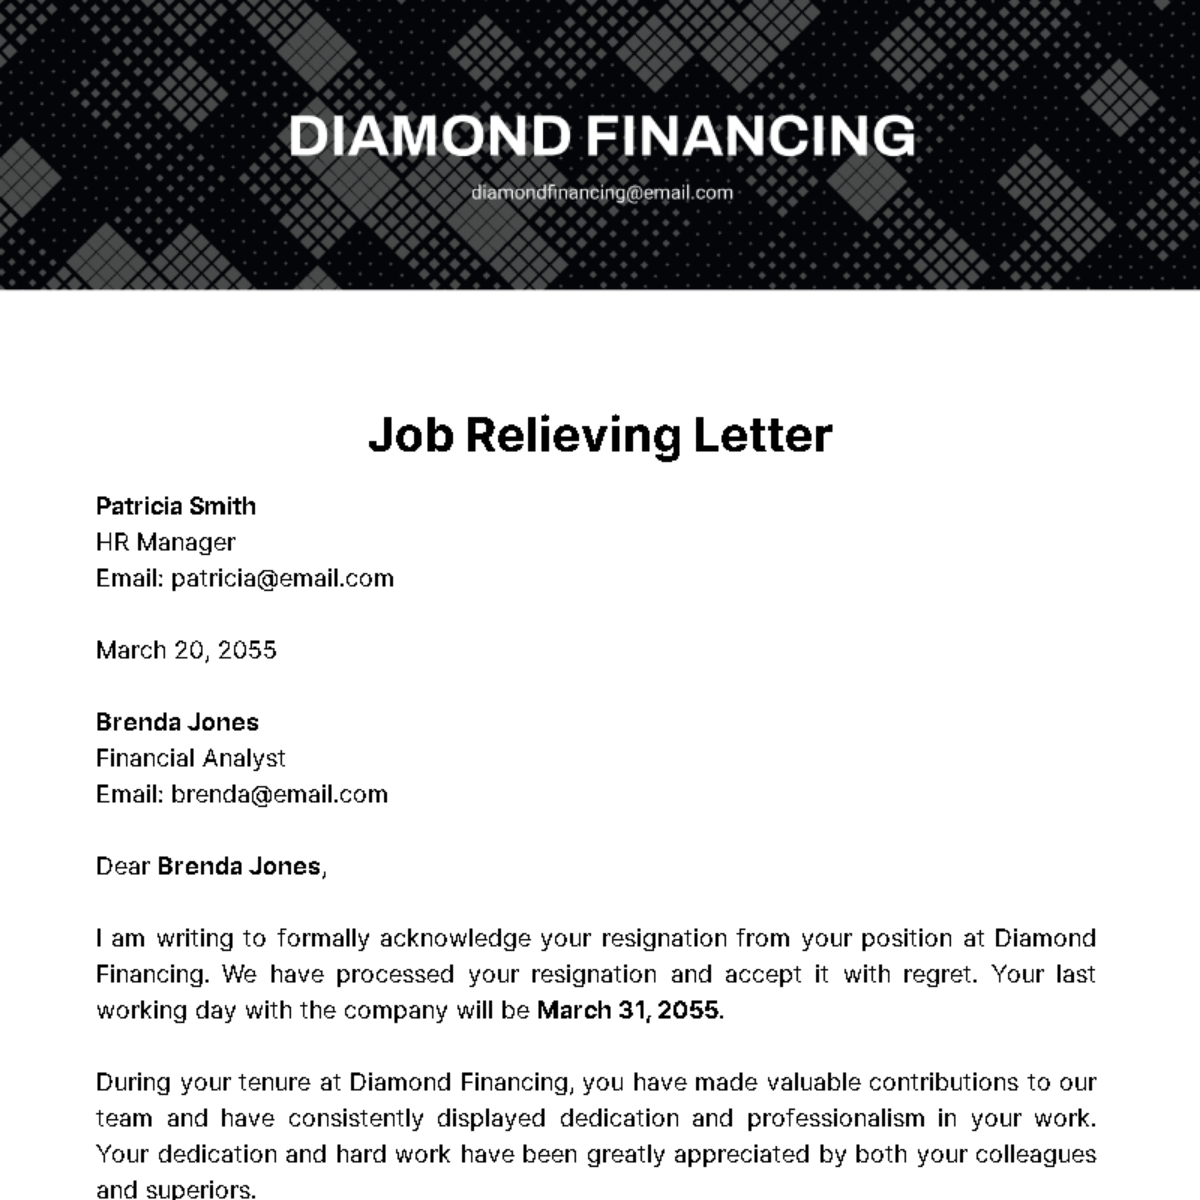 Job Relieving Letter Template